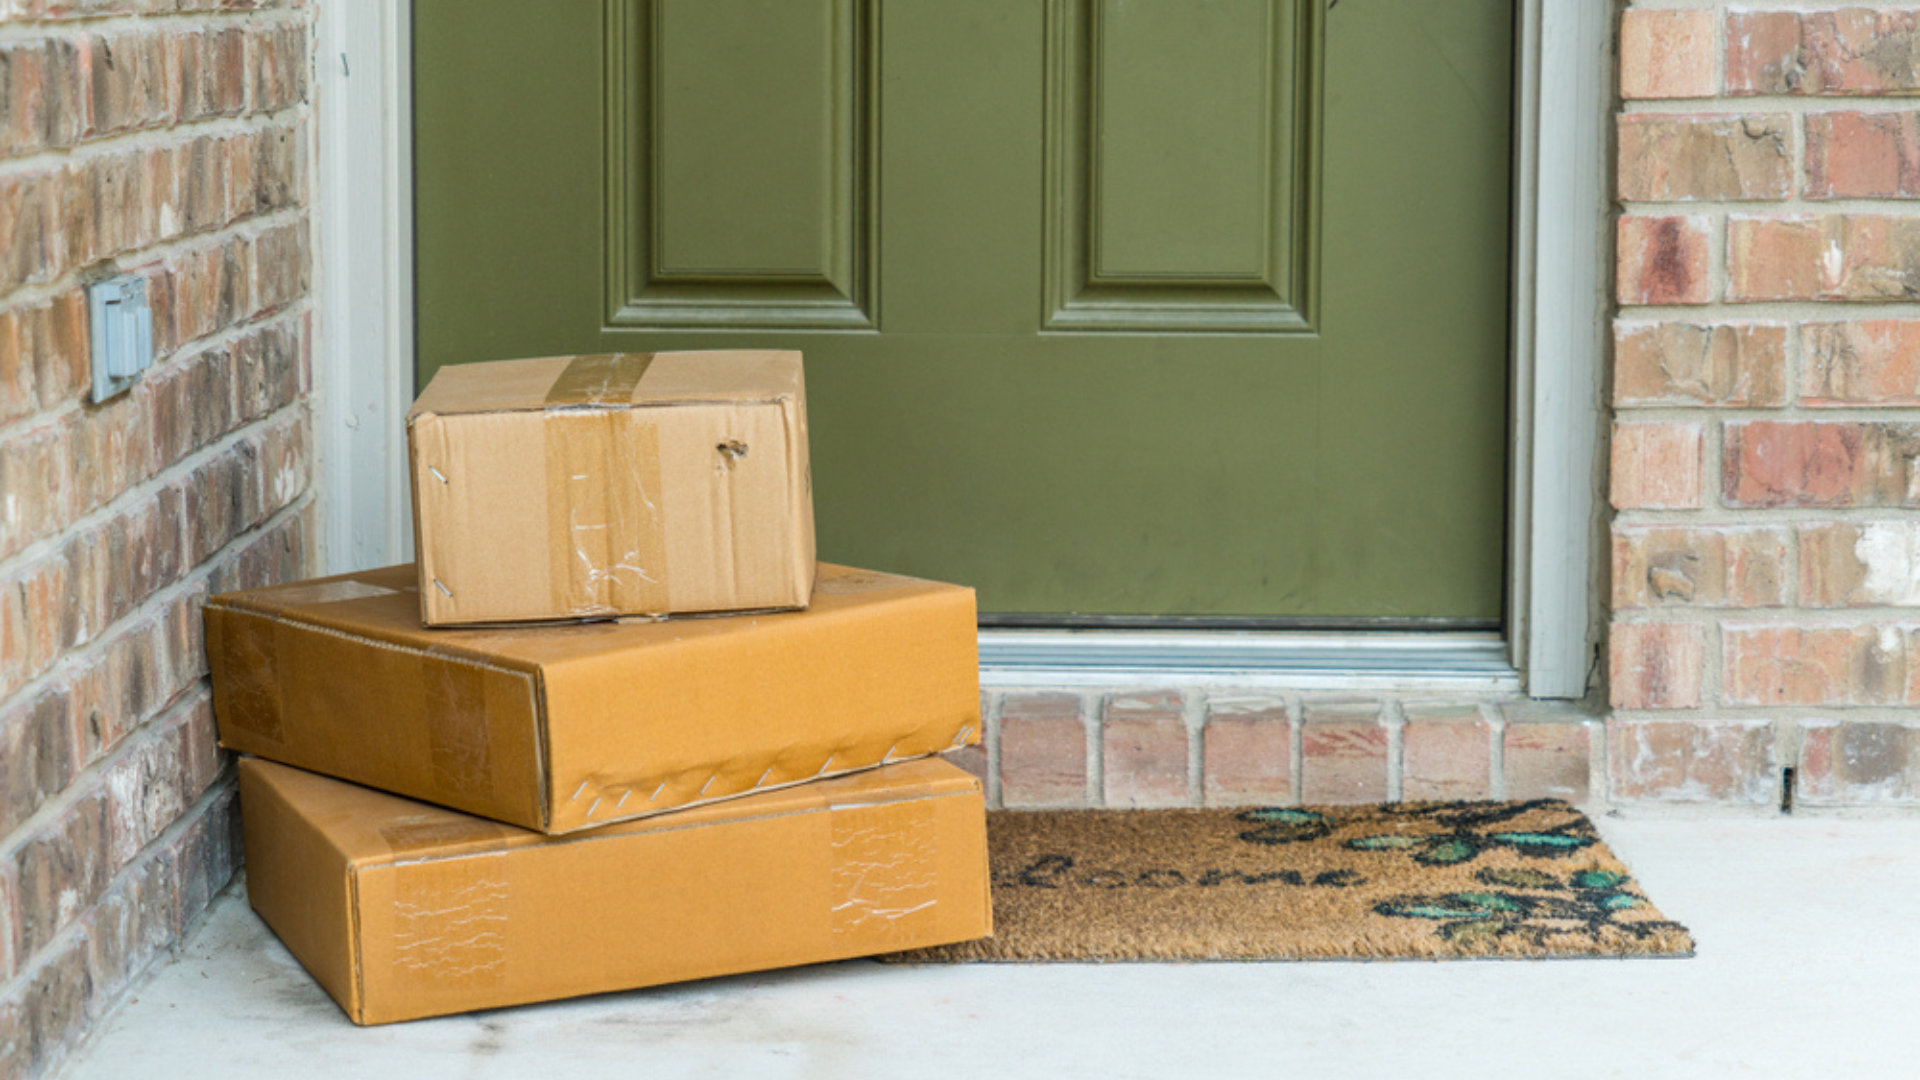 packages on front door step